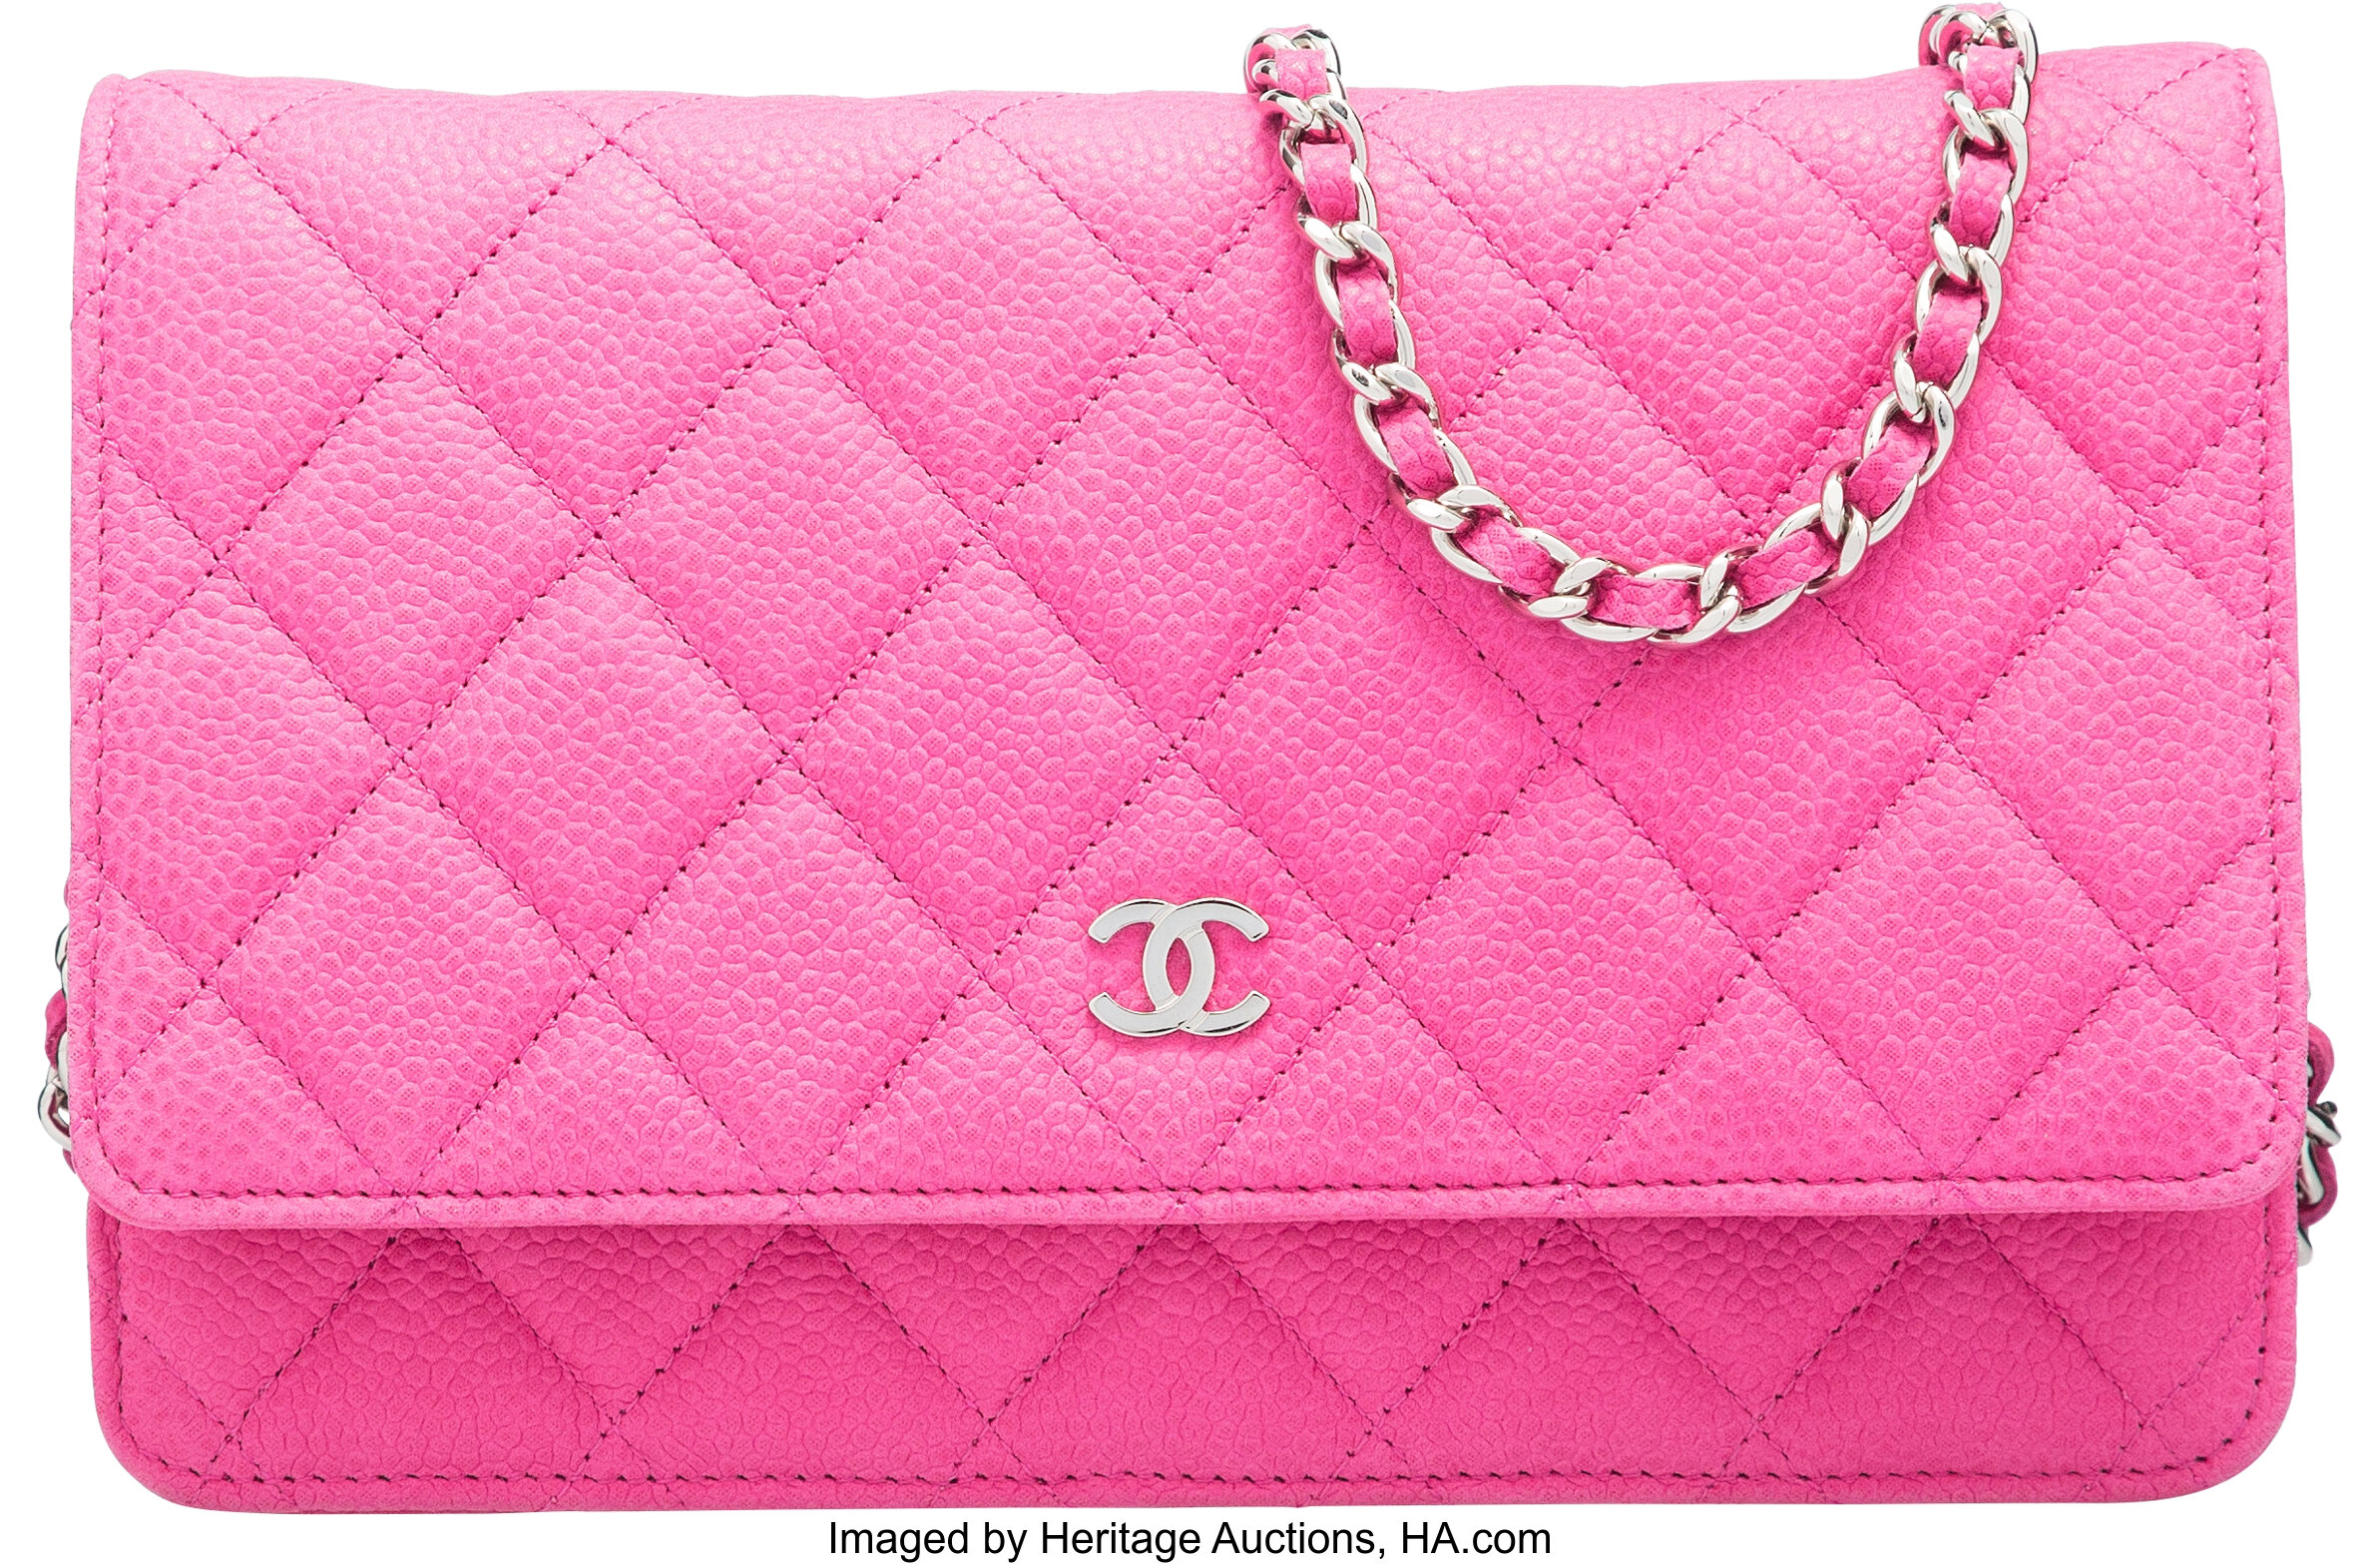 Chanel Matte Pink Quilted Caviar Leather Wallet on Chain Bag., Lot #58011